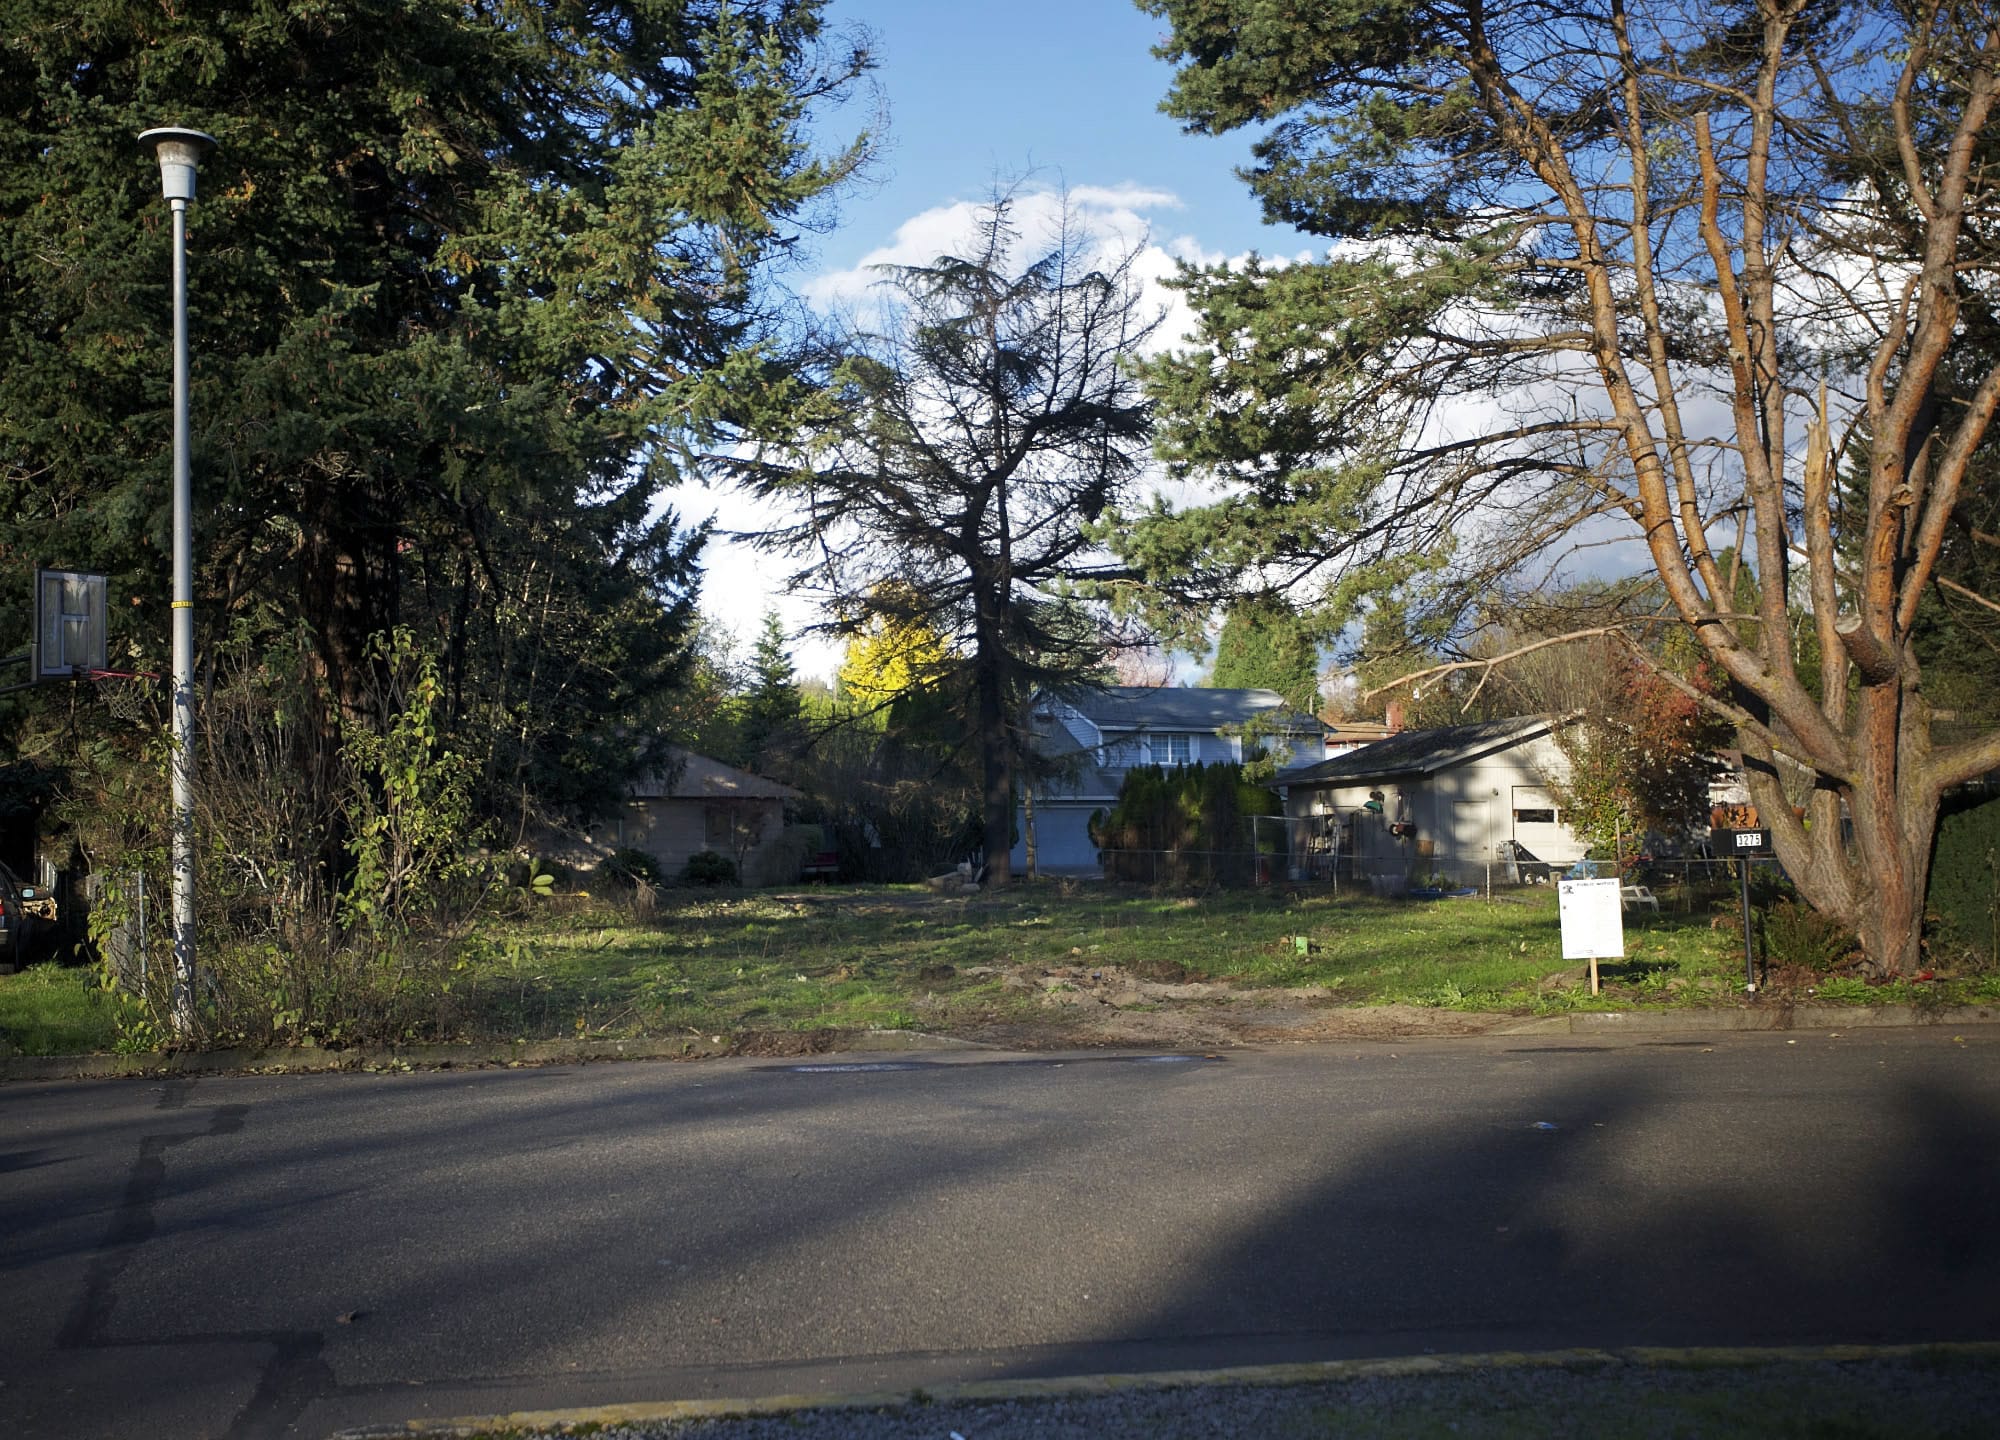 A mailbox remains at the site of the Steven Stanbary standoff in Washougal.